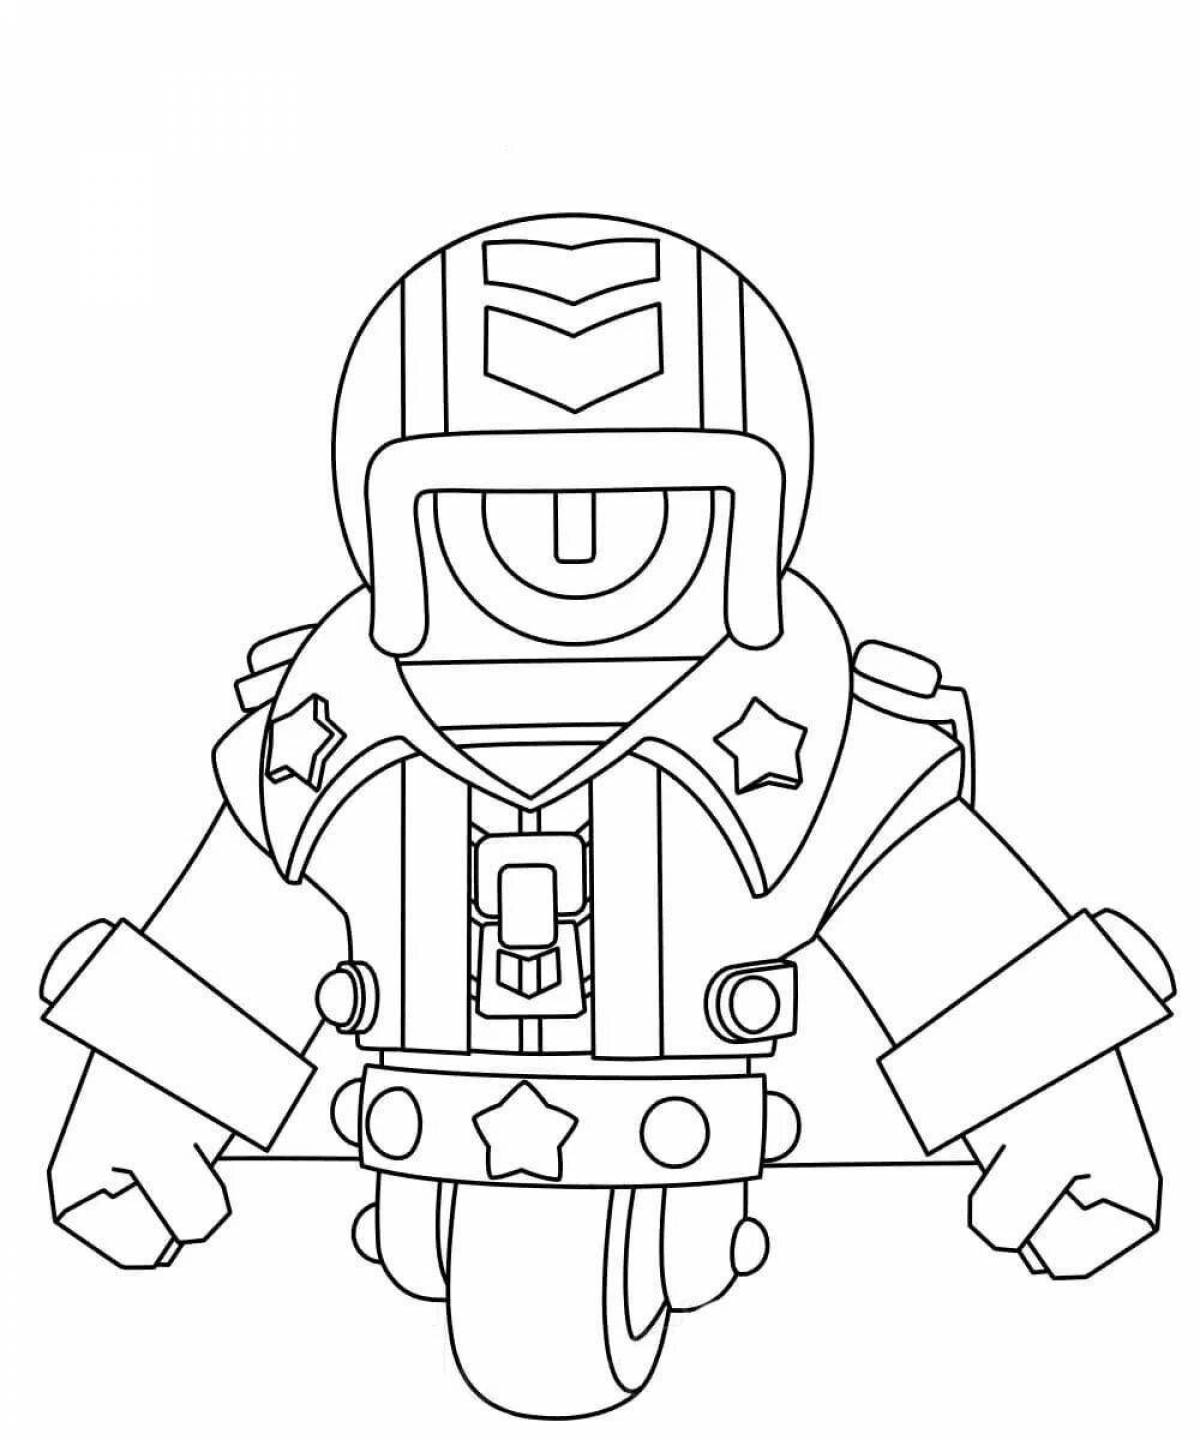 Colorful bravo pass coloring page